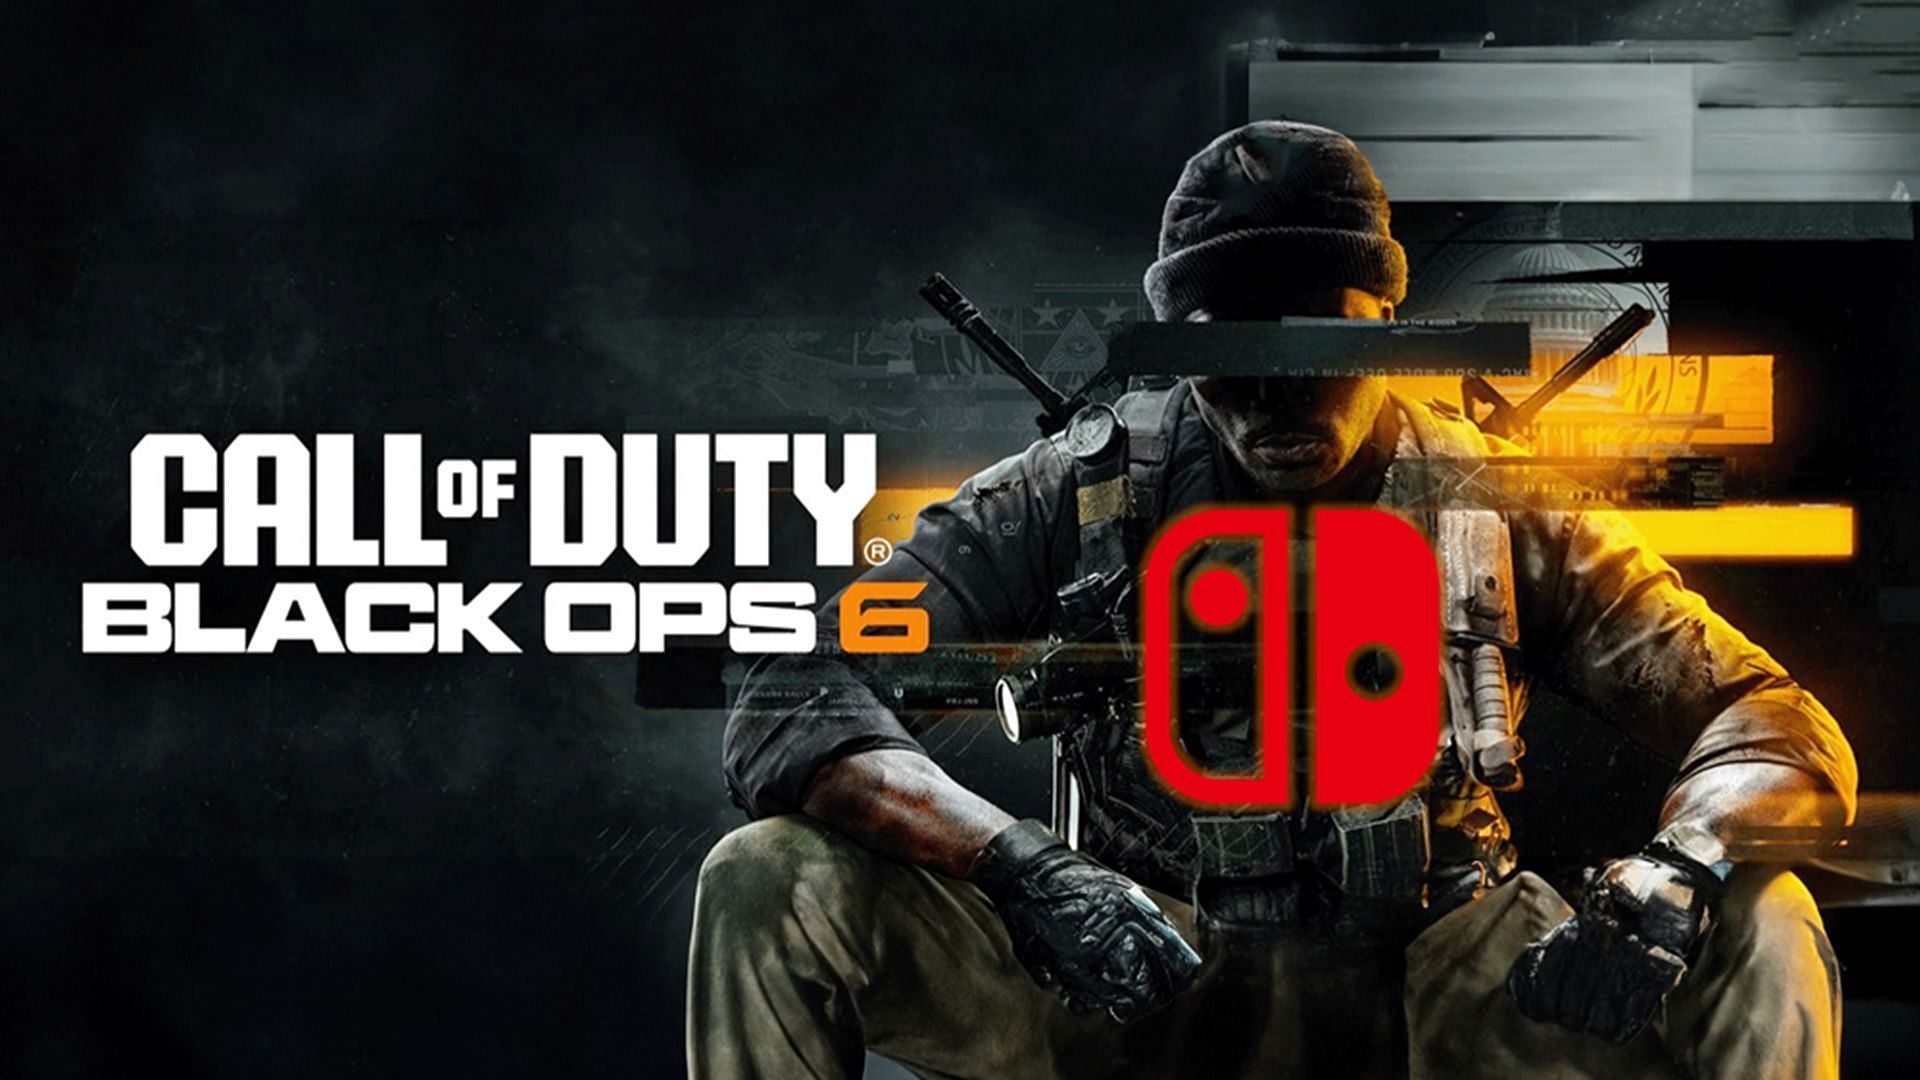 Black Ops 6 is not likely to come to Nintendo Switch until the next-gen Switch 2 console releases in 2025 according to a report